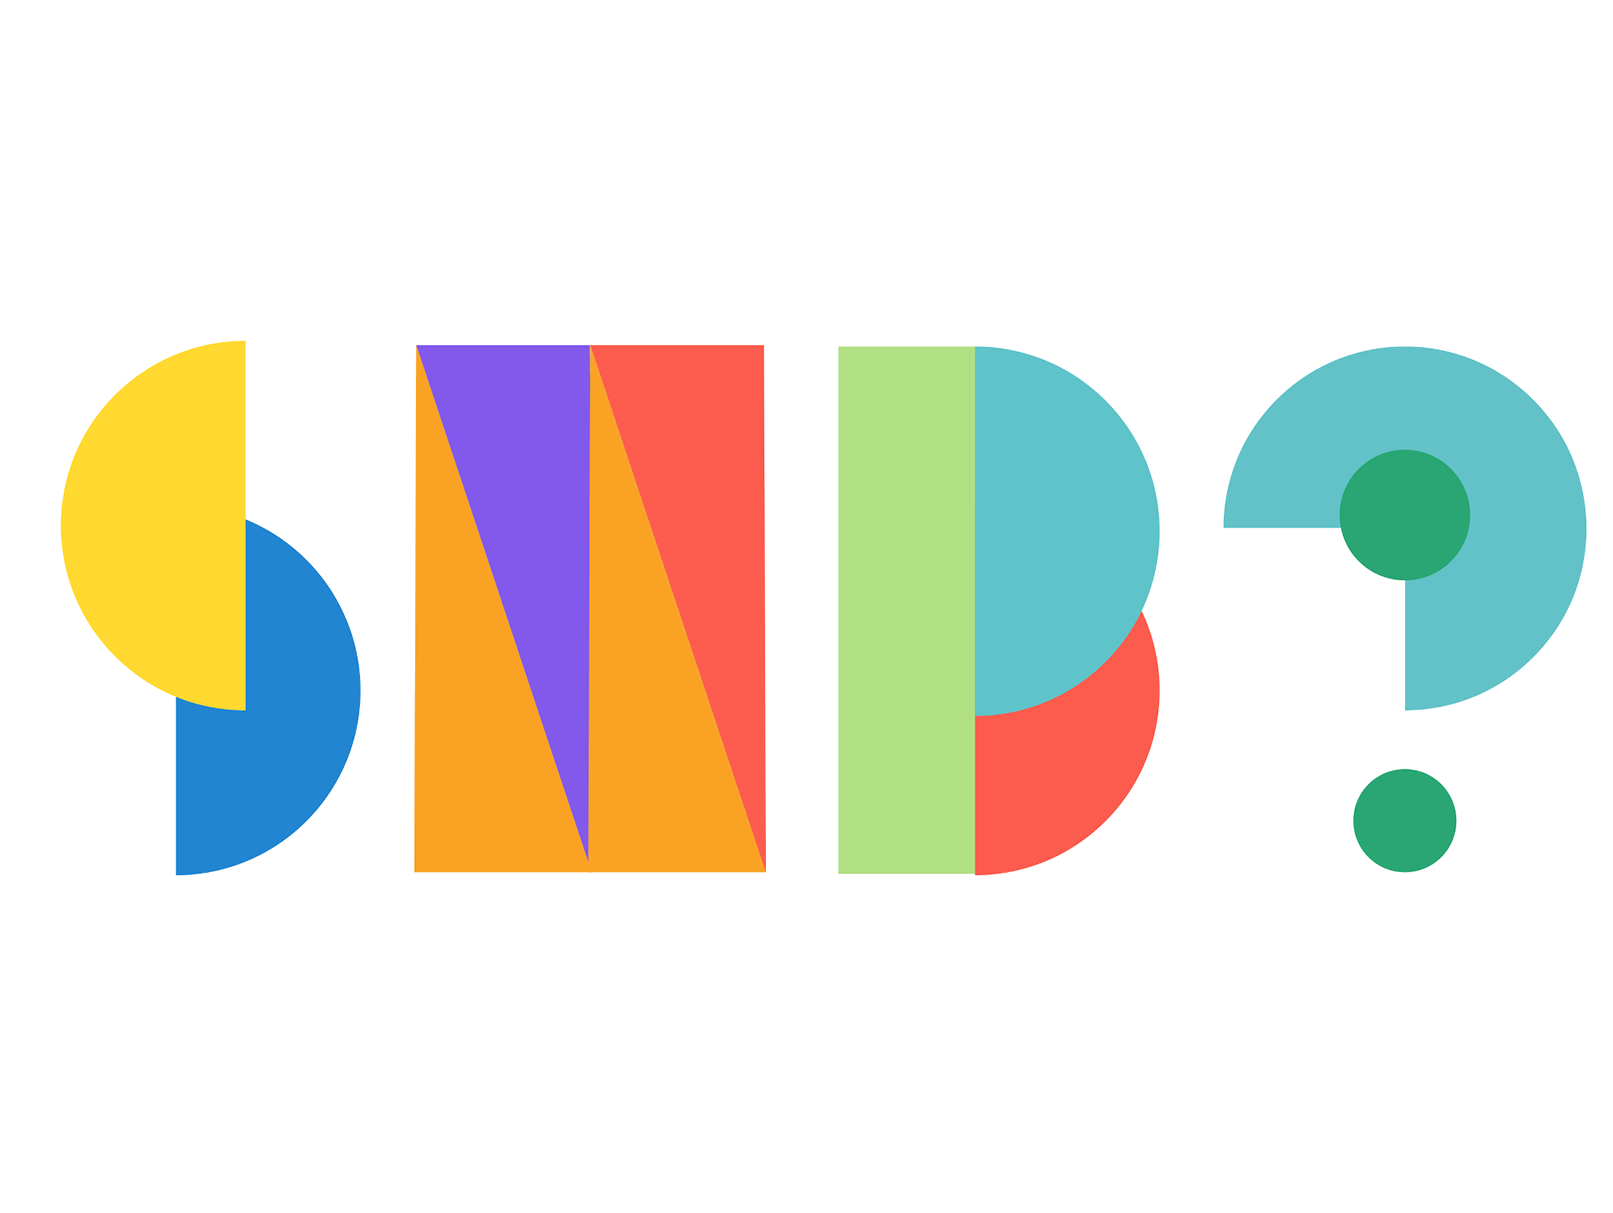 An image featuring three brightly colored shapes that represent the letters SMB followed by a question mark.